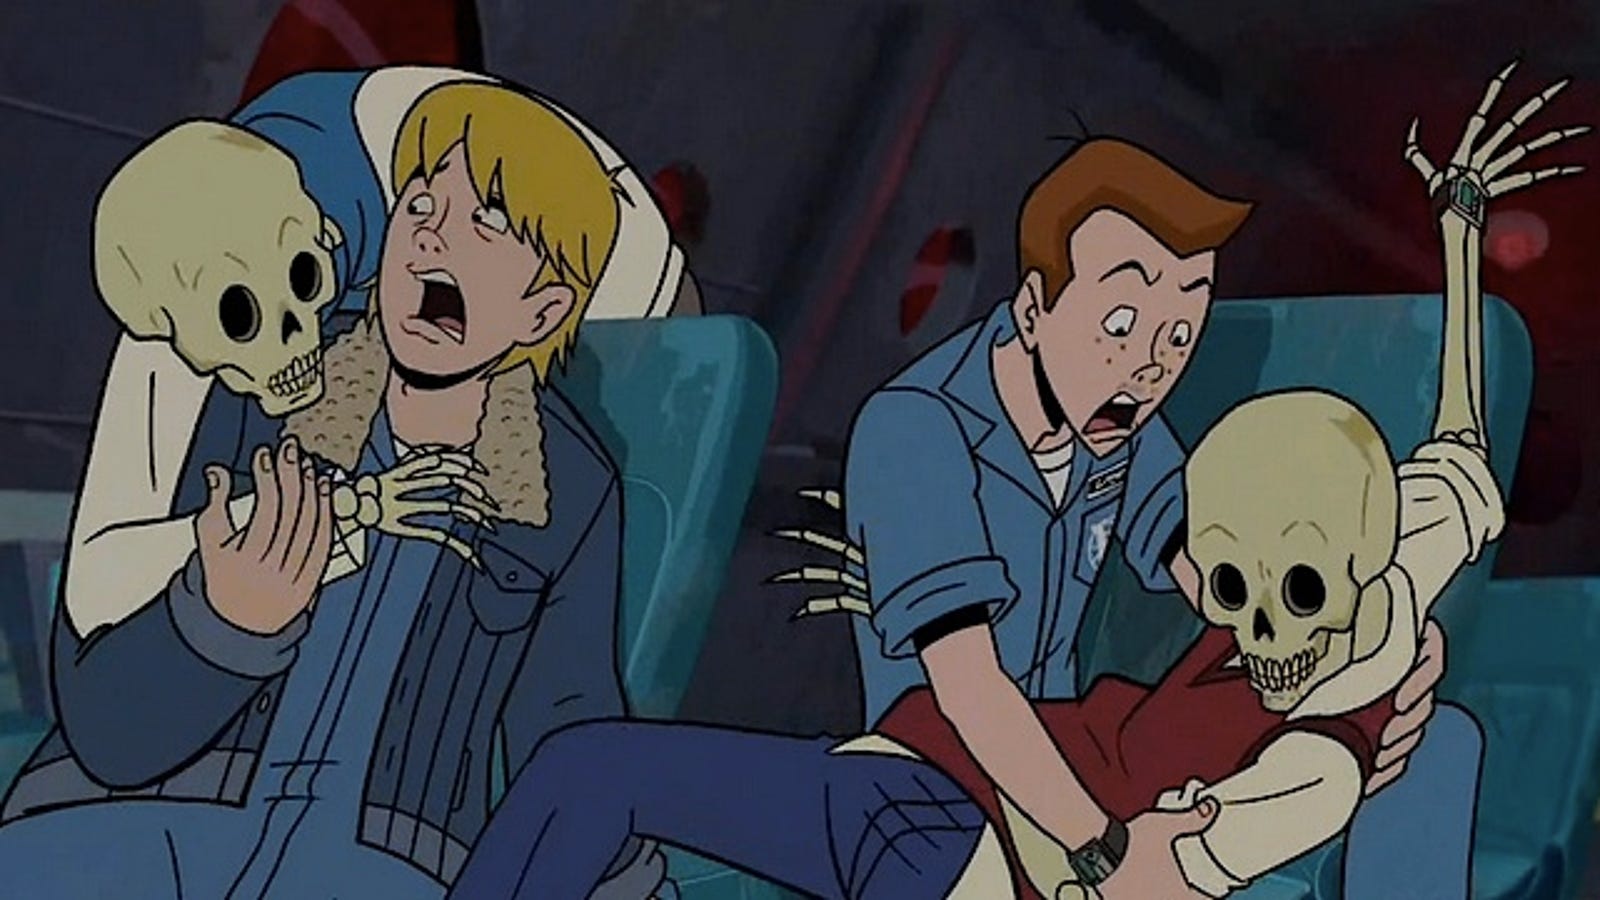 The Venture Bros. are returning in 2013, so we asked the show's